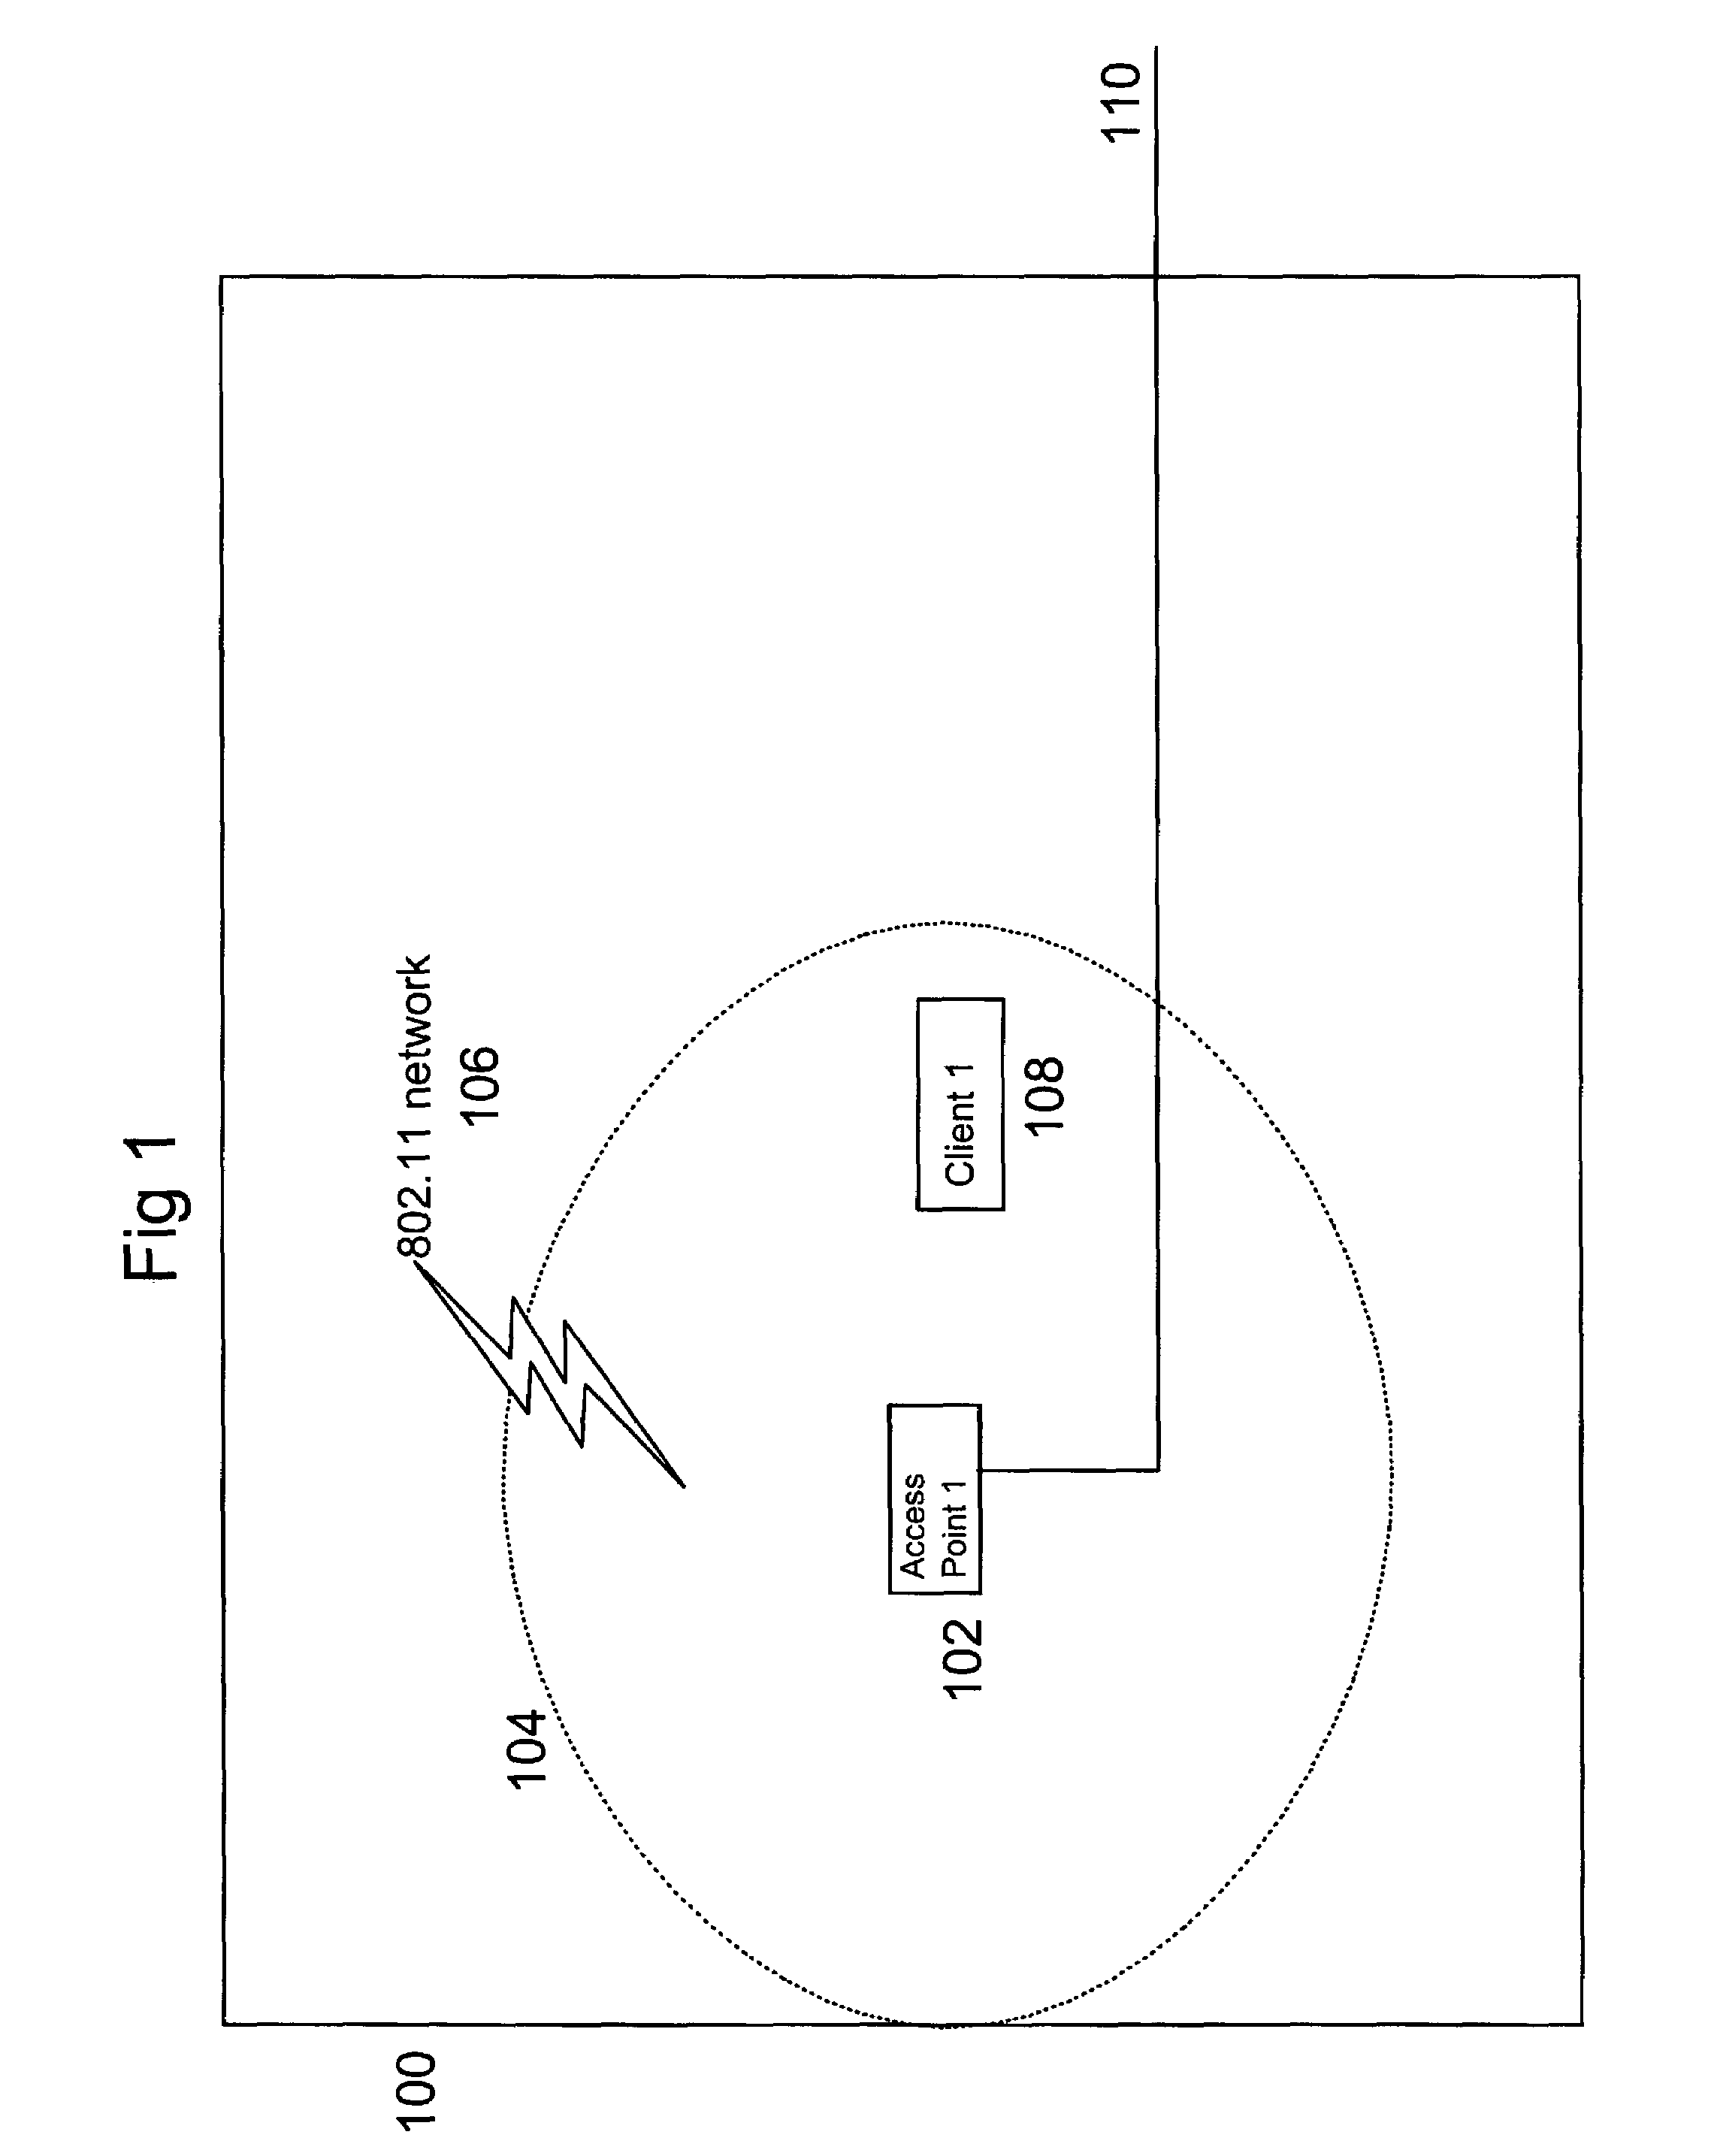 Apparatus, method and program to optimize battery life in a wireless device